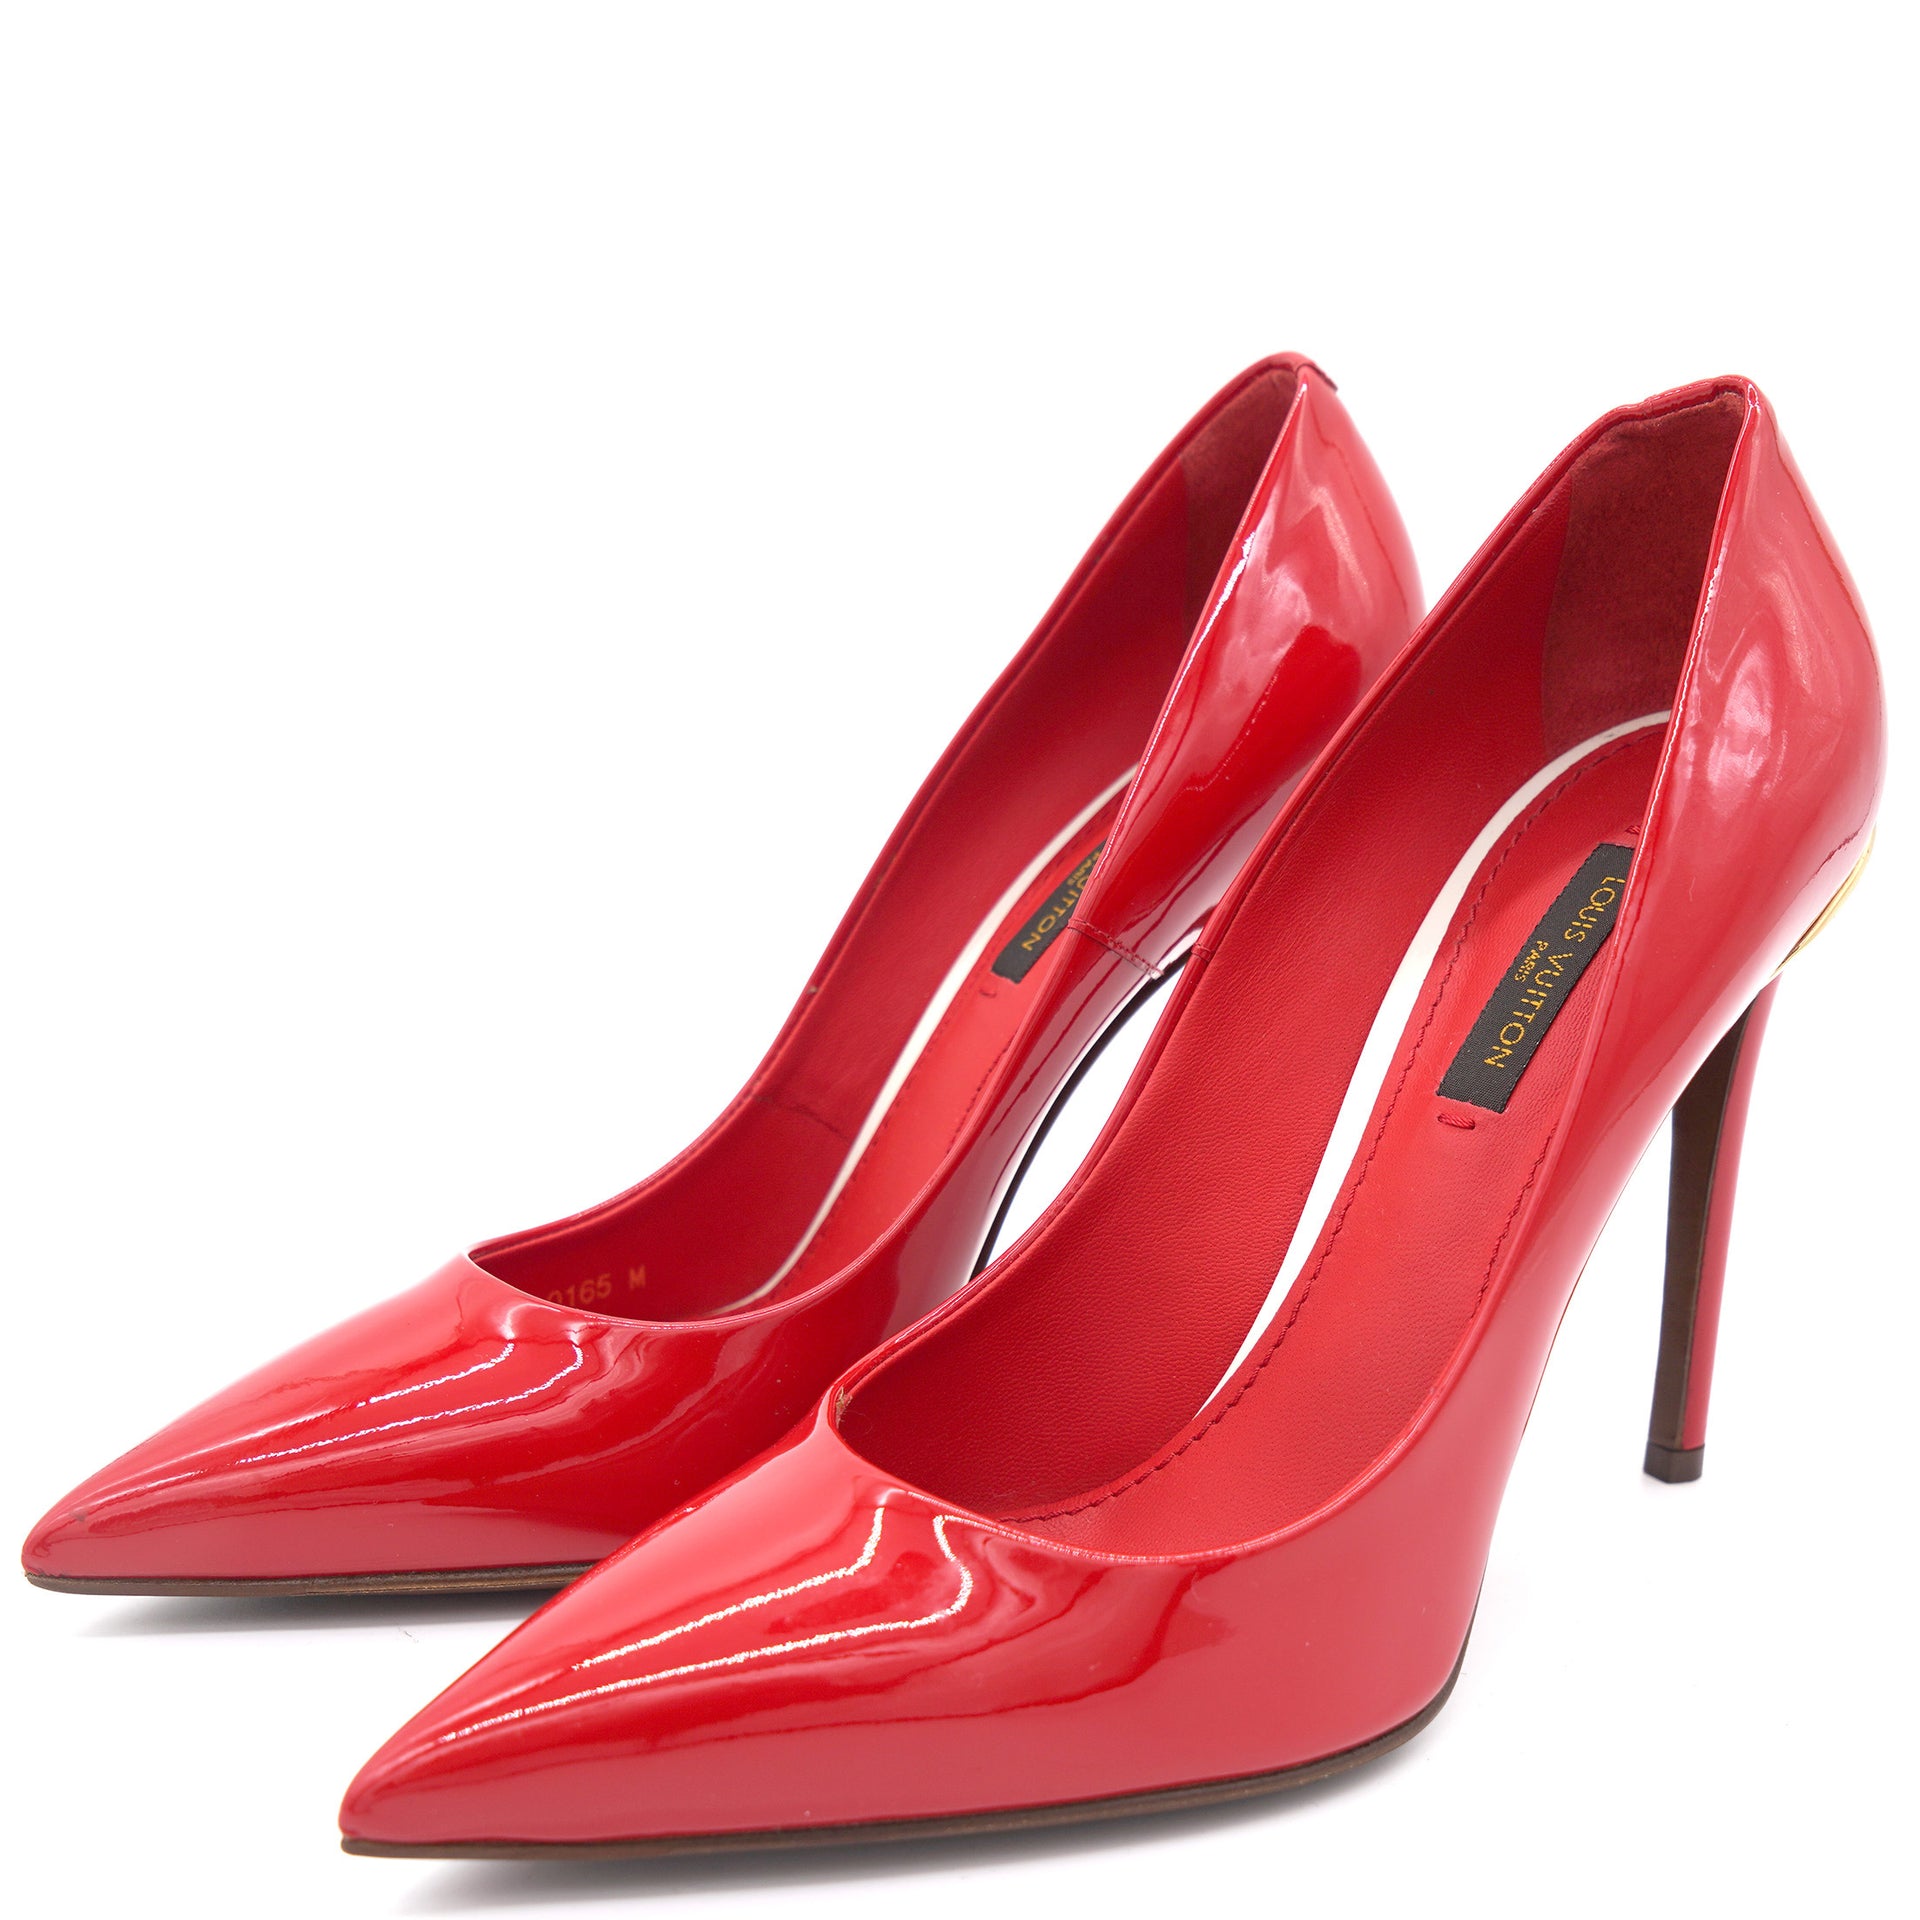 Louis Vuitton Eyeline Red Pump Heels pointed toe patent leather red Size 36